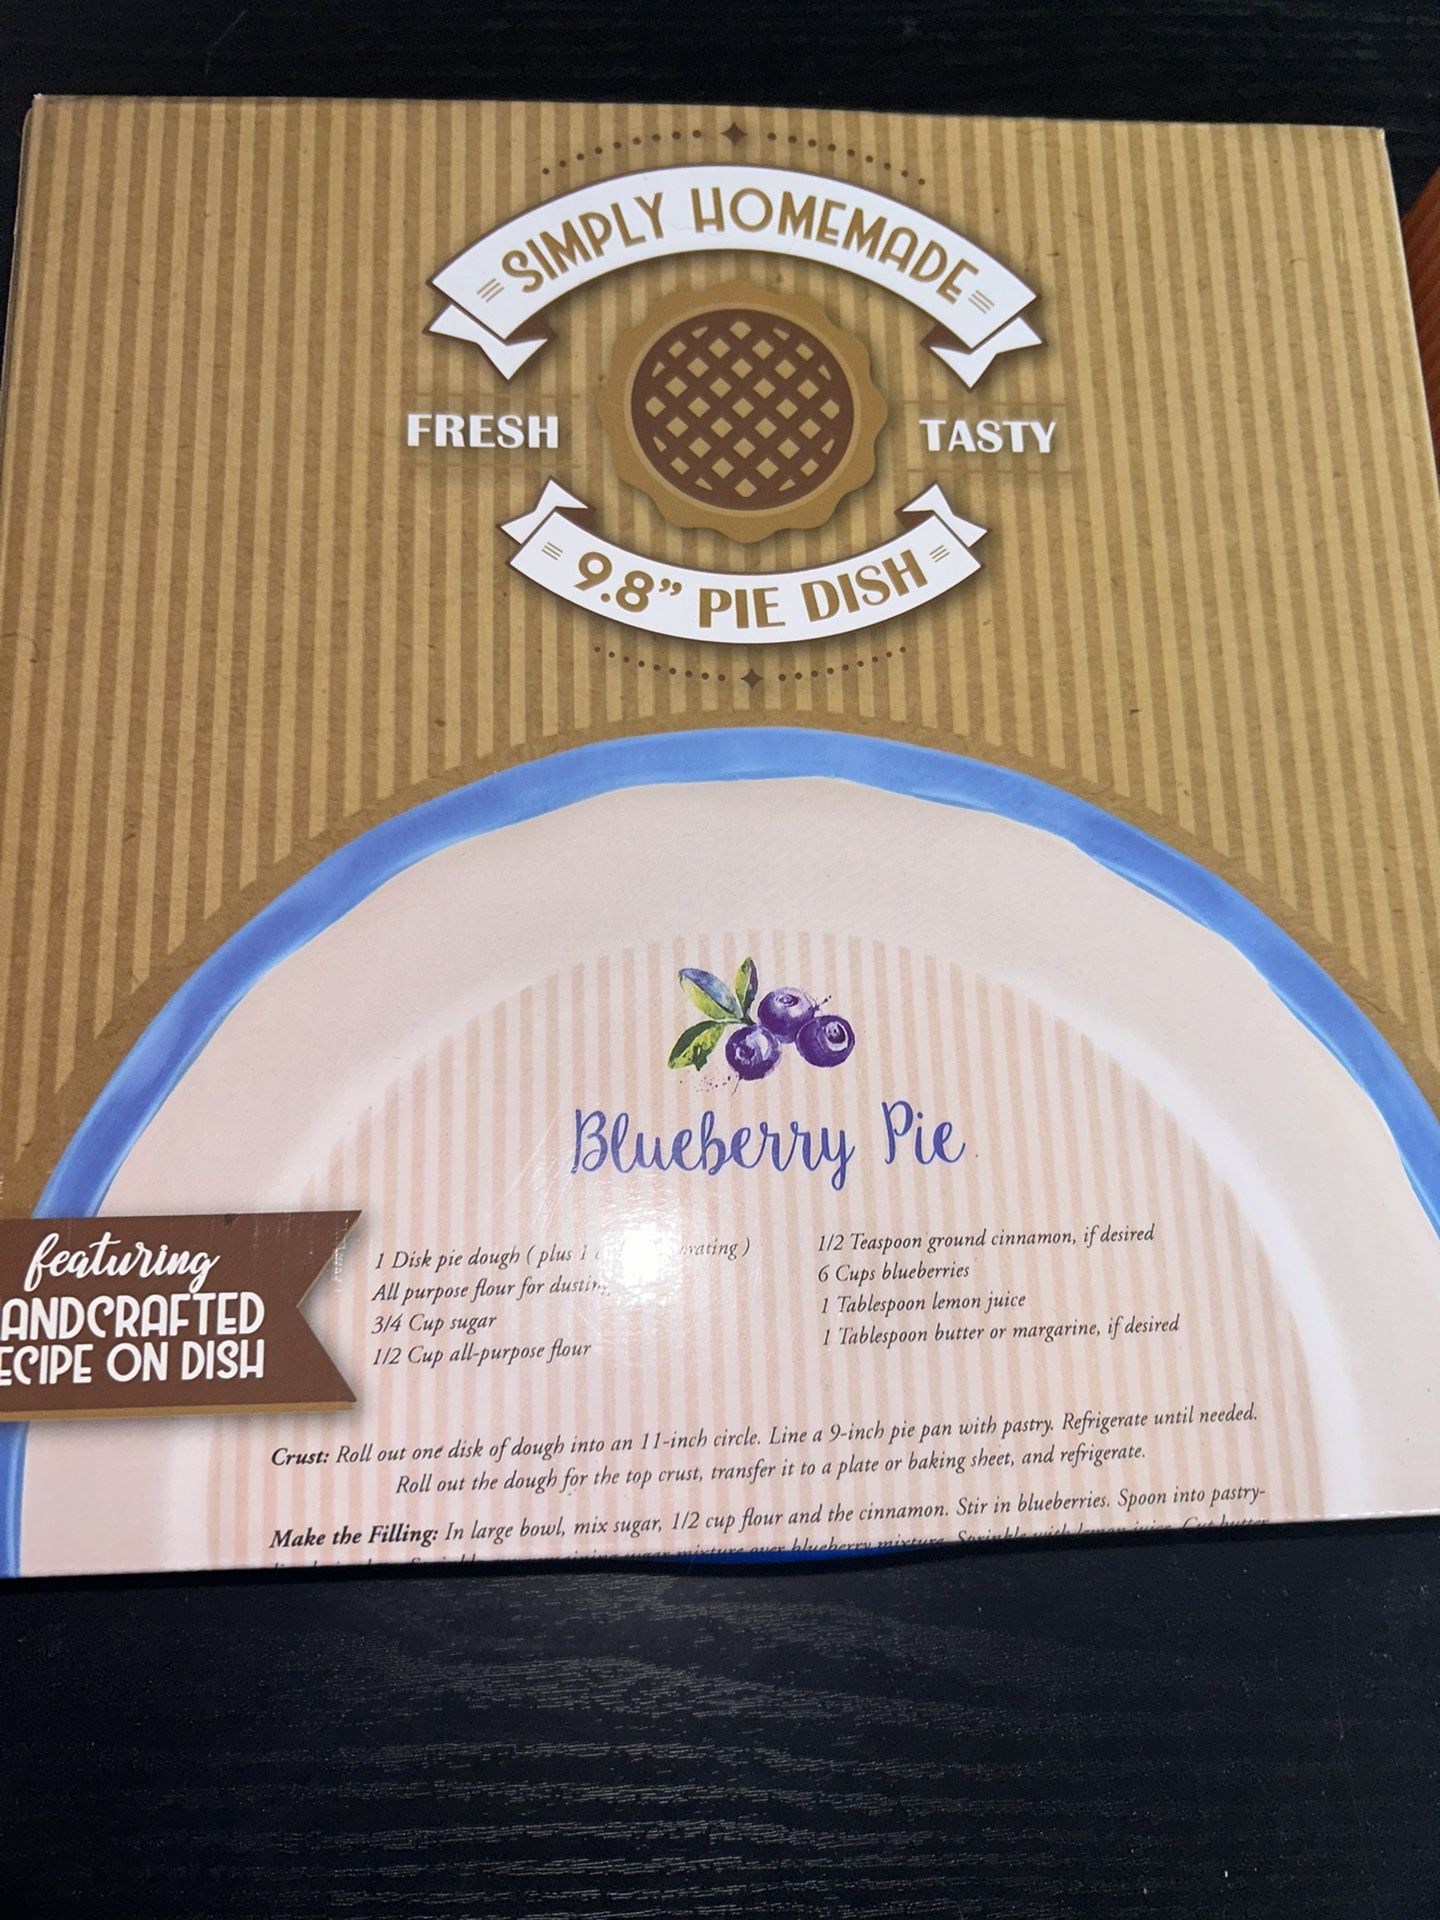 New Pie Dishes With Recipes In Them 